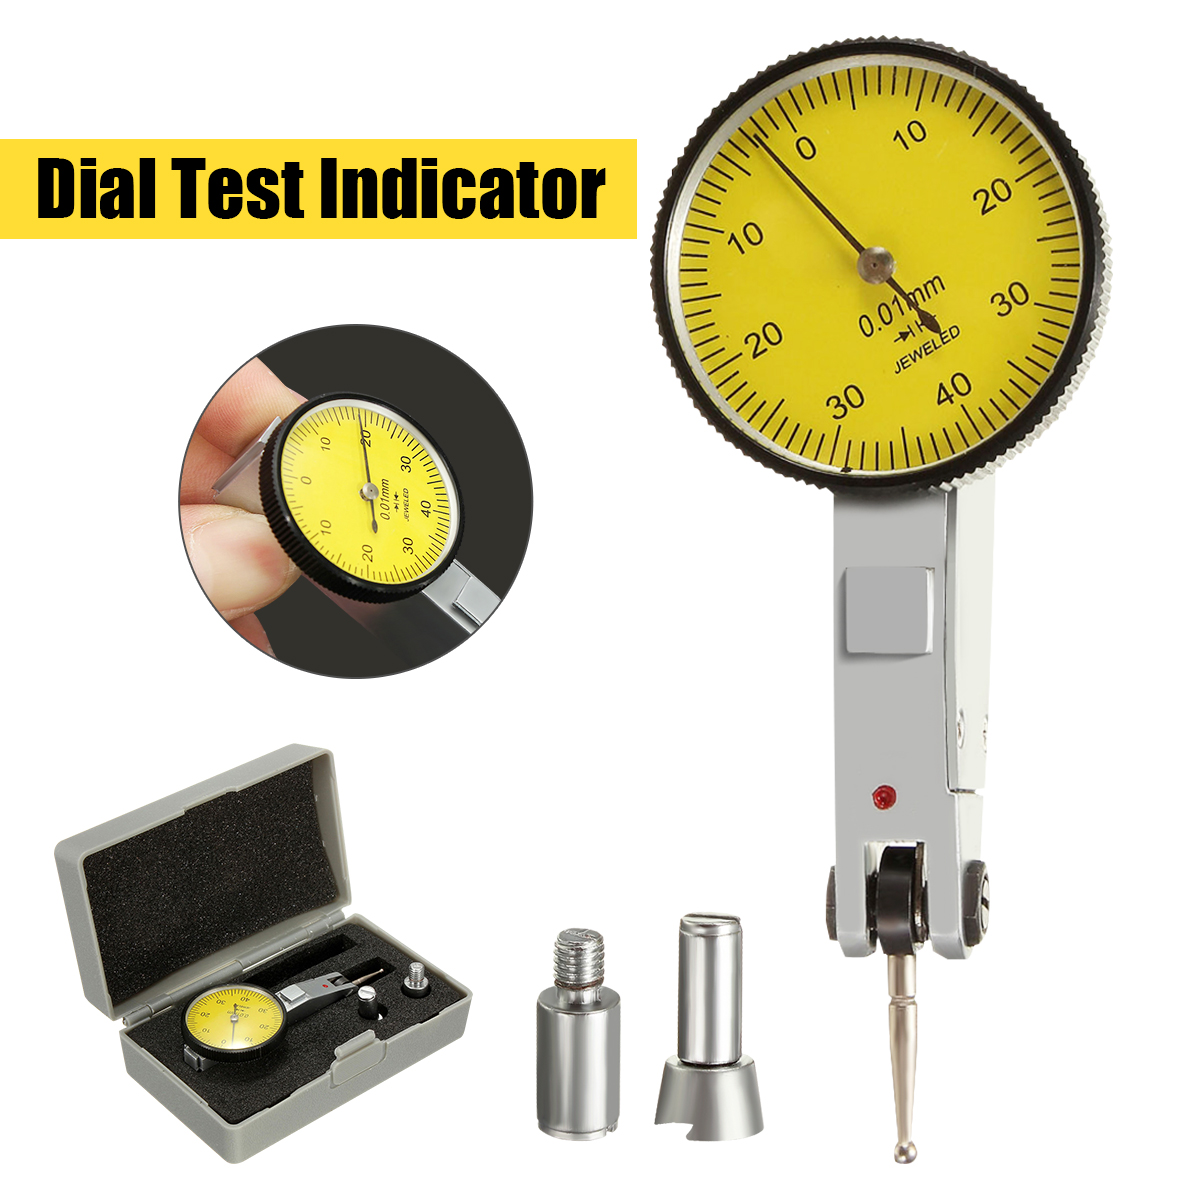 Dial-Test-Level-Indicator-Measuring-Precision-001mm-With-Instruction-Table-926828